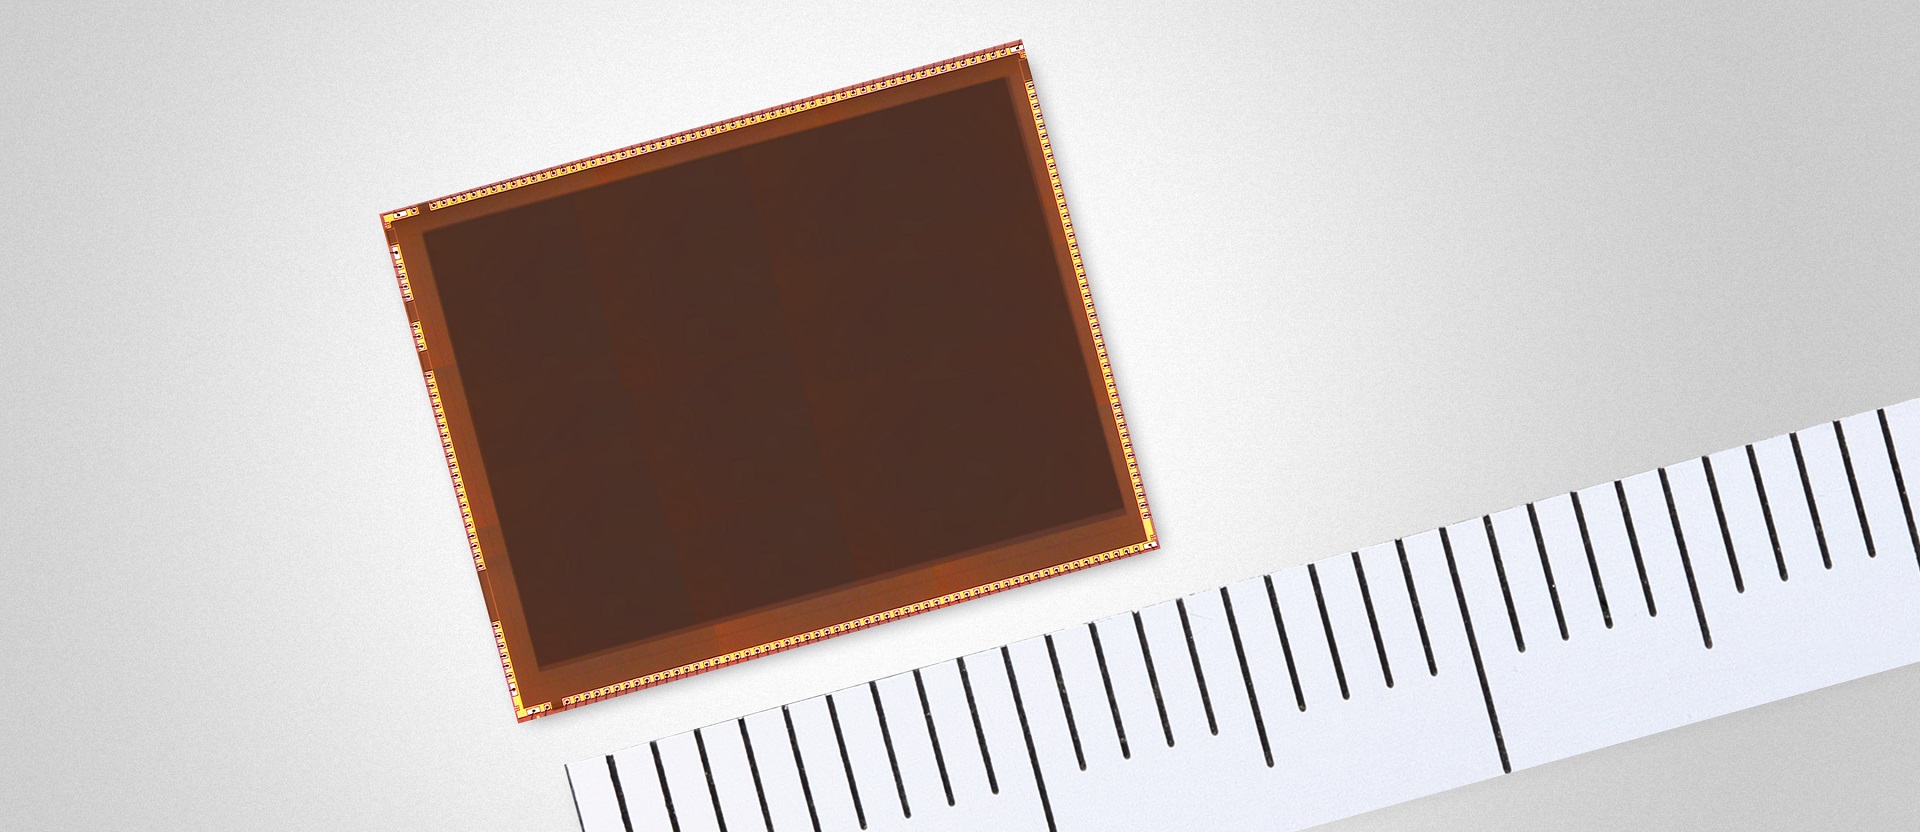 Canon Successfully Develops the World’s First 1-megapixel SPAD Sensor